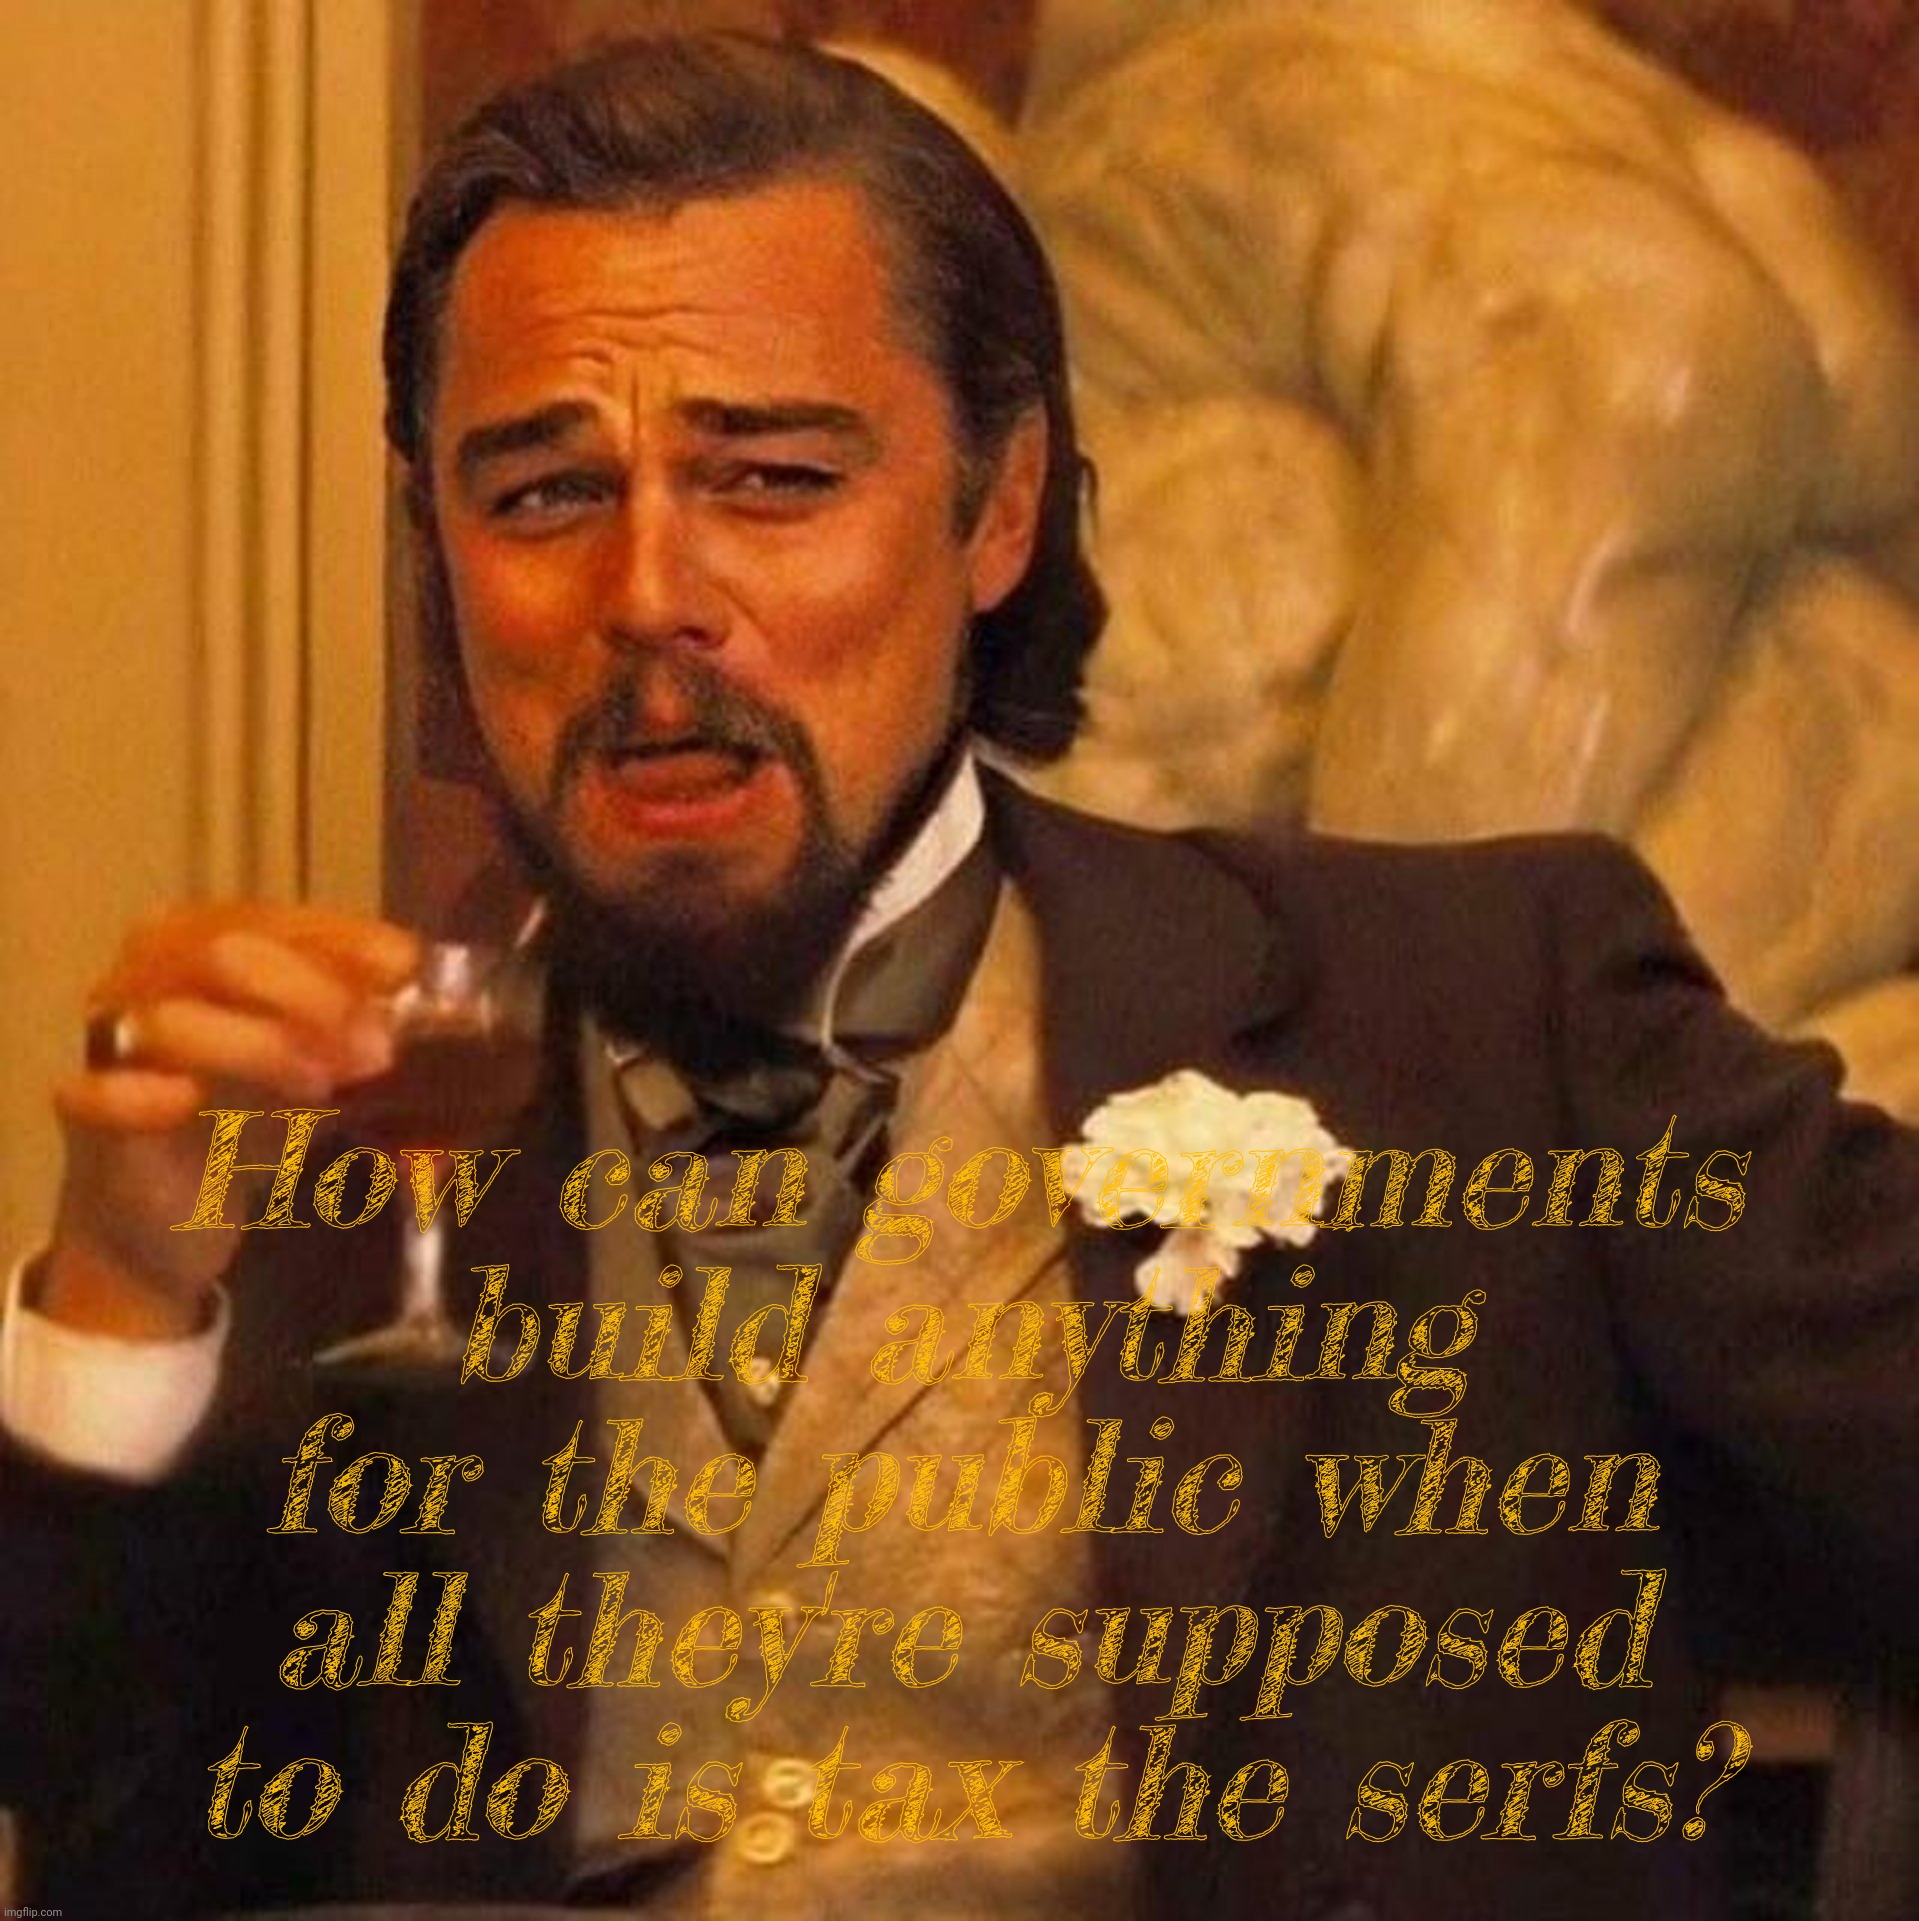 Laughing Leonardo DeCaprio Django large x | How can governments build anything for the public when all they're supposed to do is tax the serfs? | image tagged in laughing leonardo decaprio django large x | made w/ Imgflip meme maker